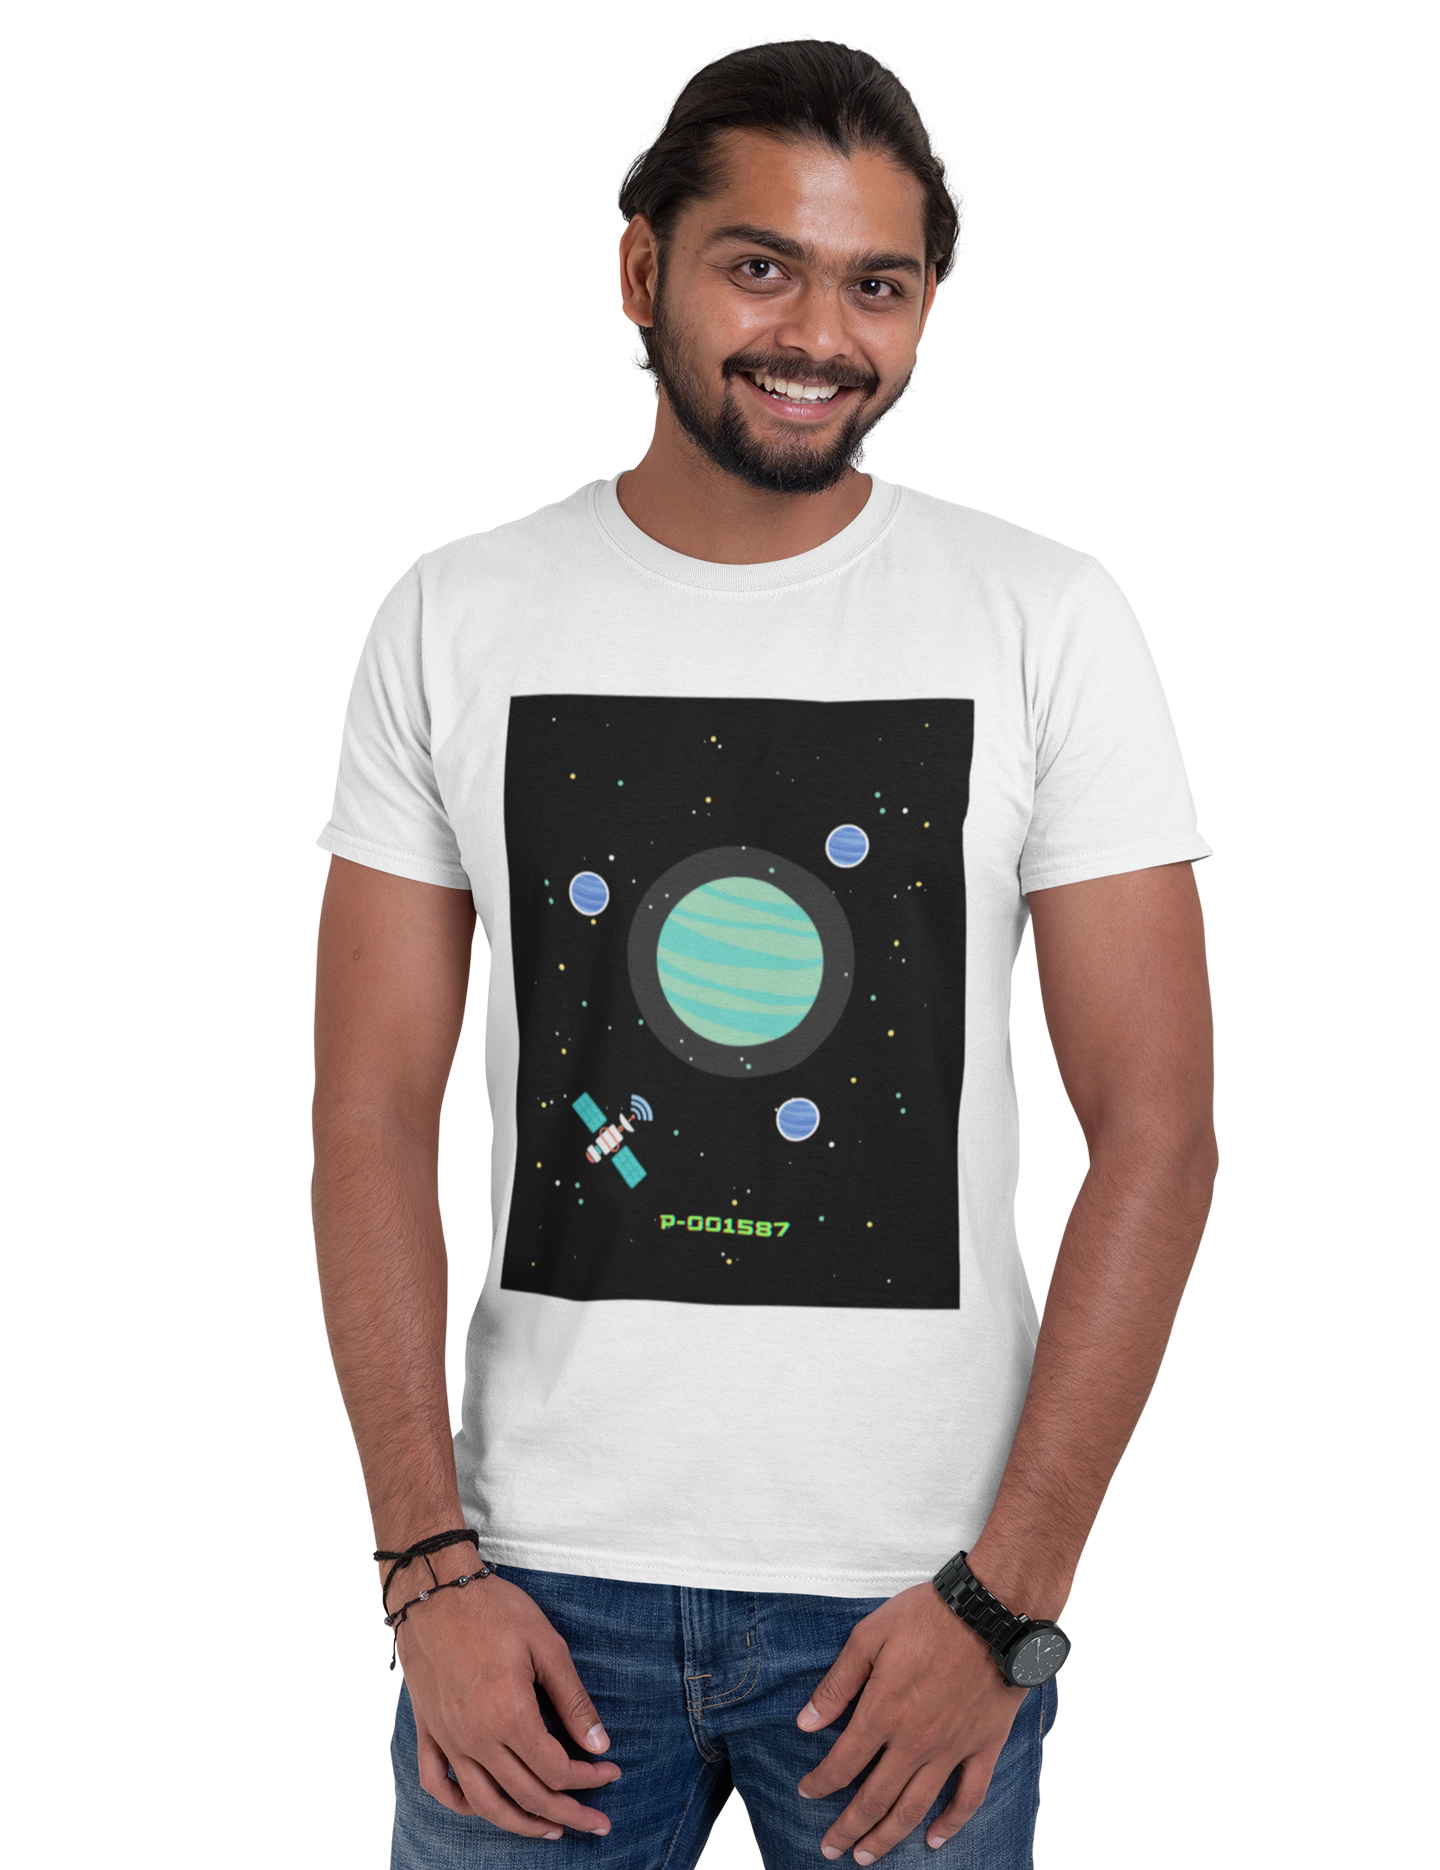 New Planet Discovery Unisex Jersey Short Sleeve T-Shirt